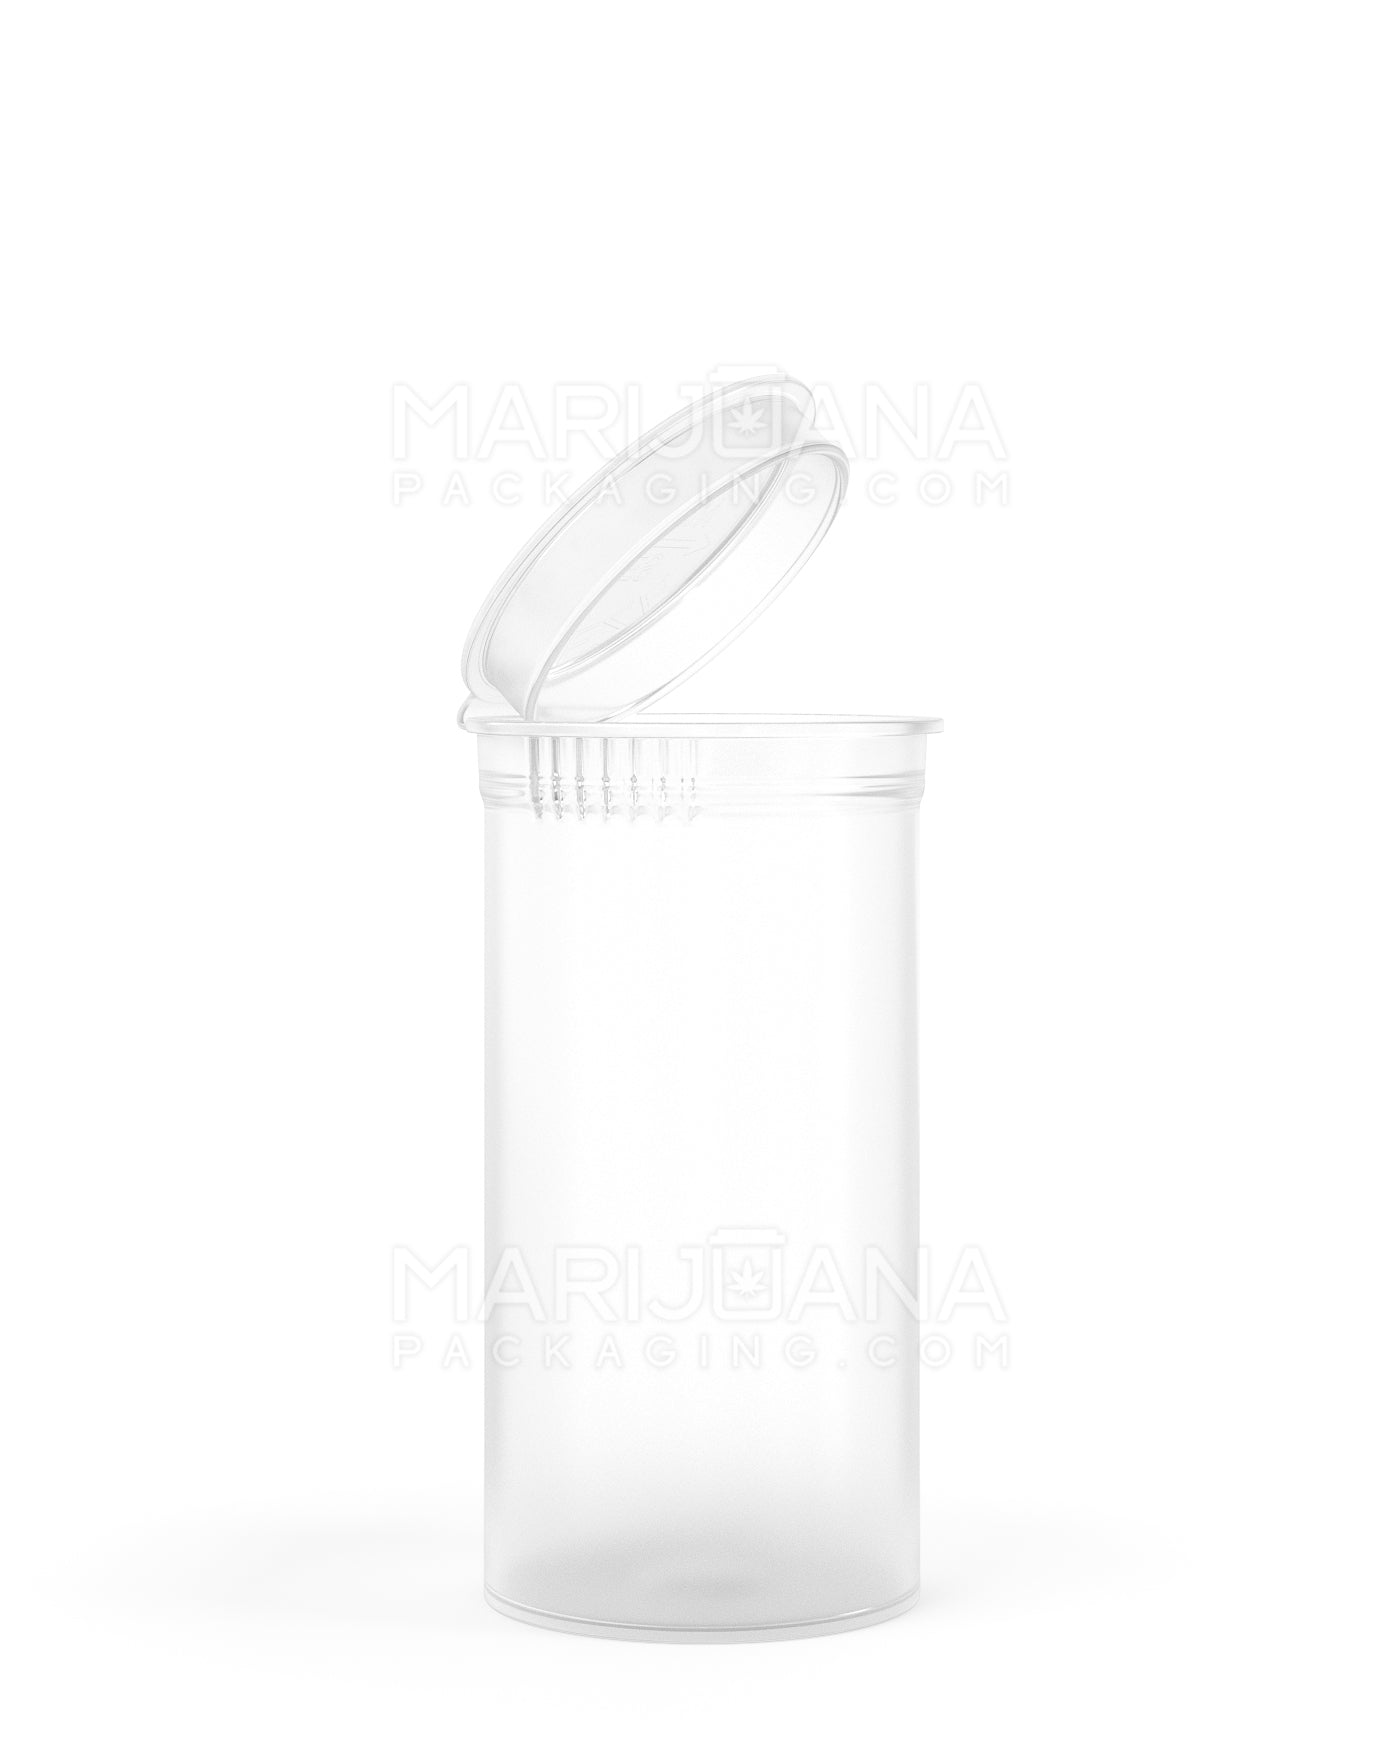 Child Resistant 19dr Pop Top Vials Smell Proof Pill Storage Containers 30  DRAM 116mm Pre Roll Tube Squeeze Bottles